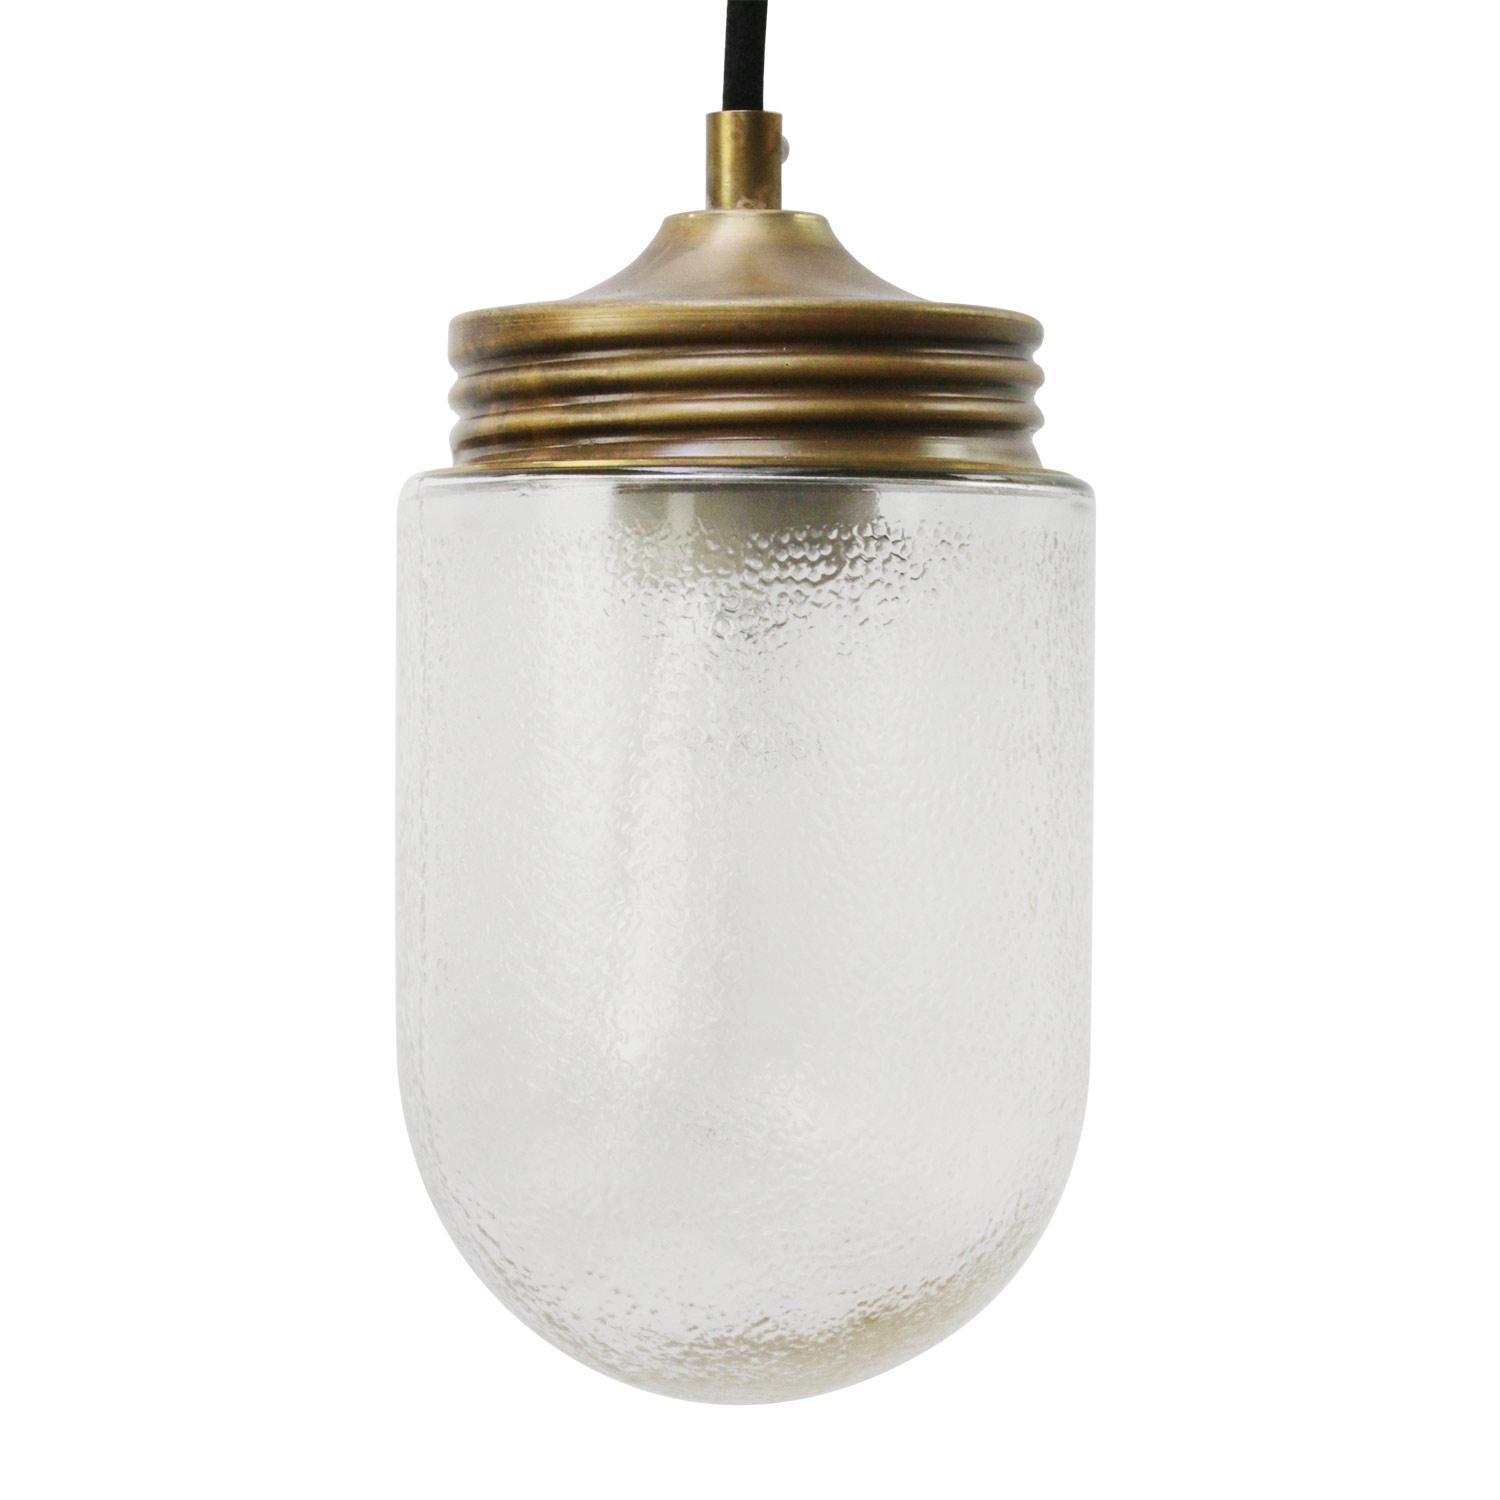 Vintage mid-century brass hanging lamp.
Brass and round frosted glass.
3 conductors, including ground wire.

Weight: 1.10 kg / 2.4 lb

Priced per individual item. All lamps have been made suitable by international standards for incandescent